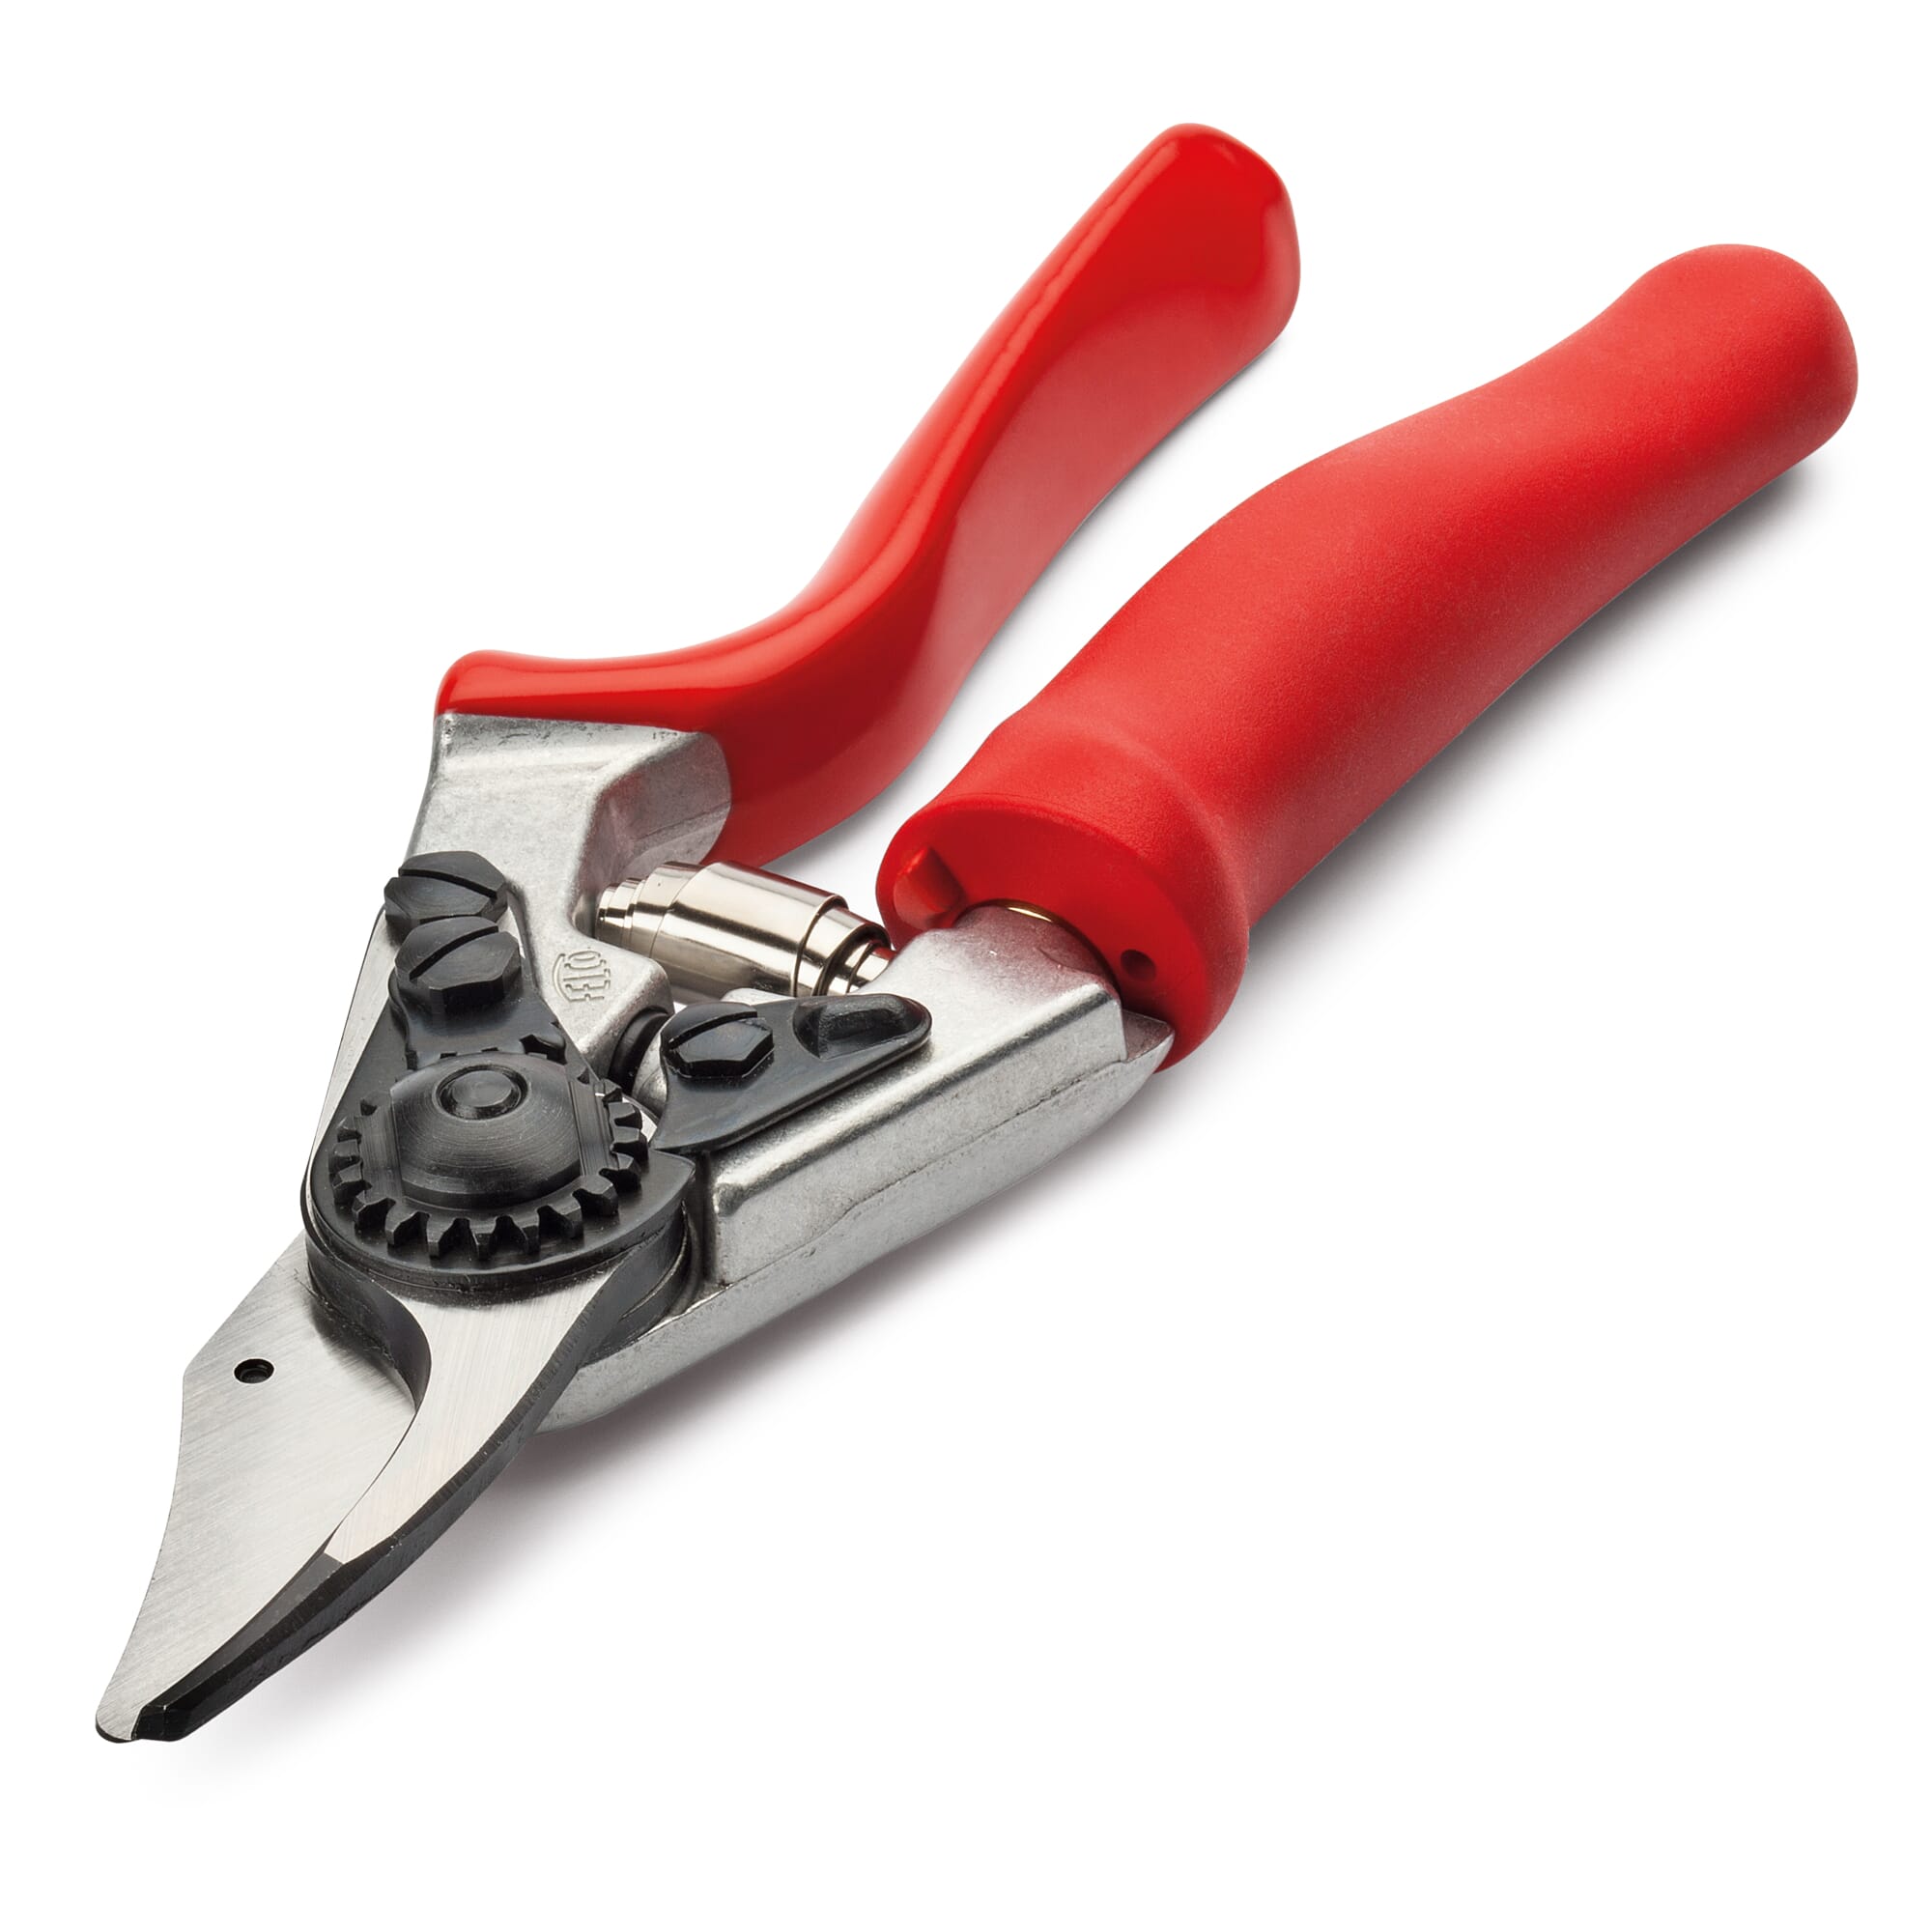 FELCO 12 Hand Pruner Compact Rotating Handle Swiss Made for sale online 